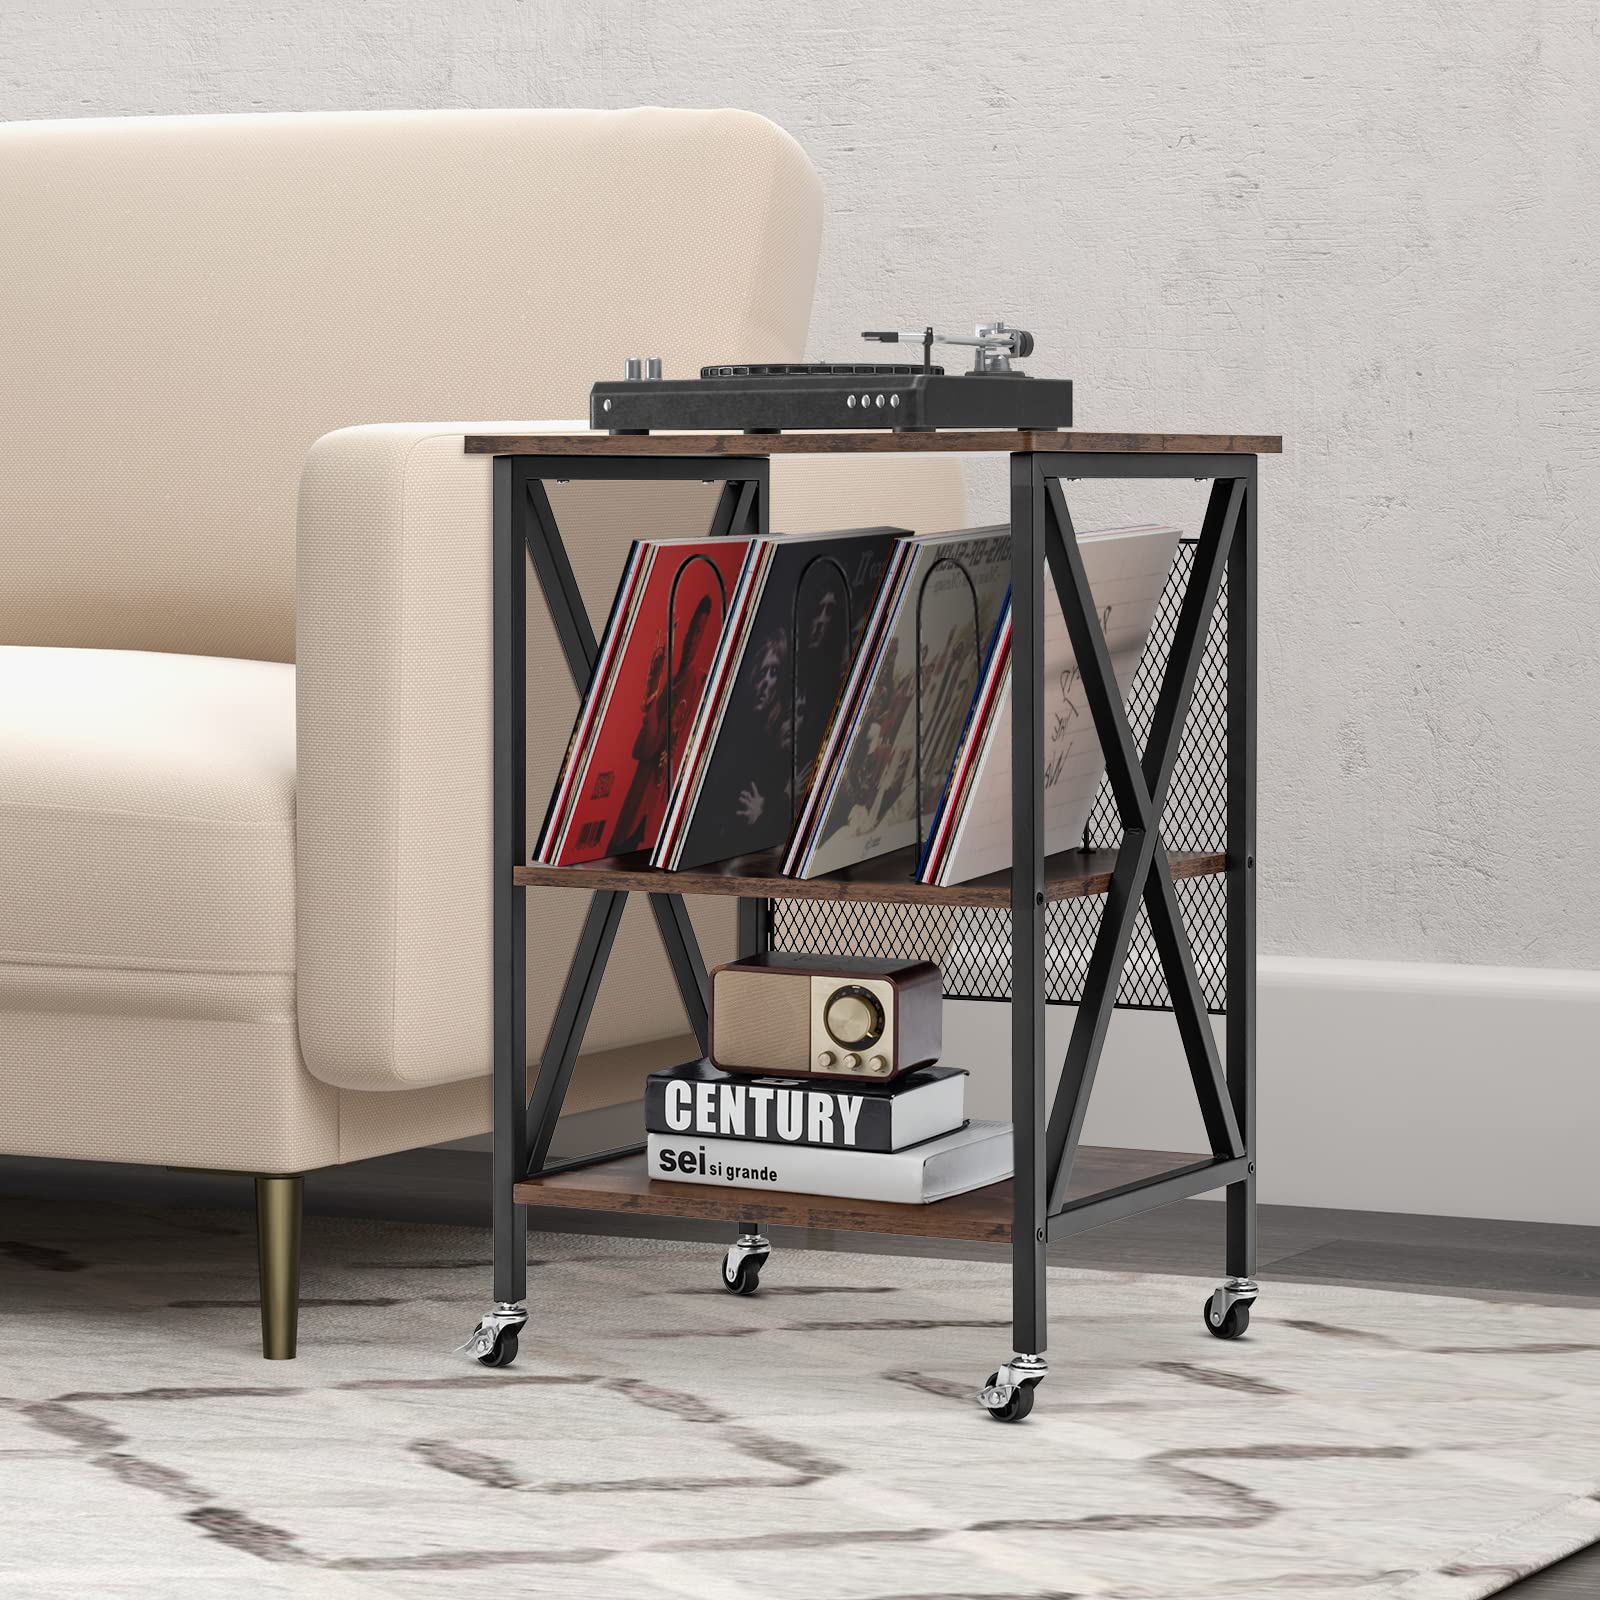 Giantex Record Player Stand, Vinyl Record Storage Table w/ 3 M-shaped Dividers & 4 Rolling Wheels, Rustic Brown